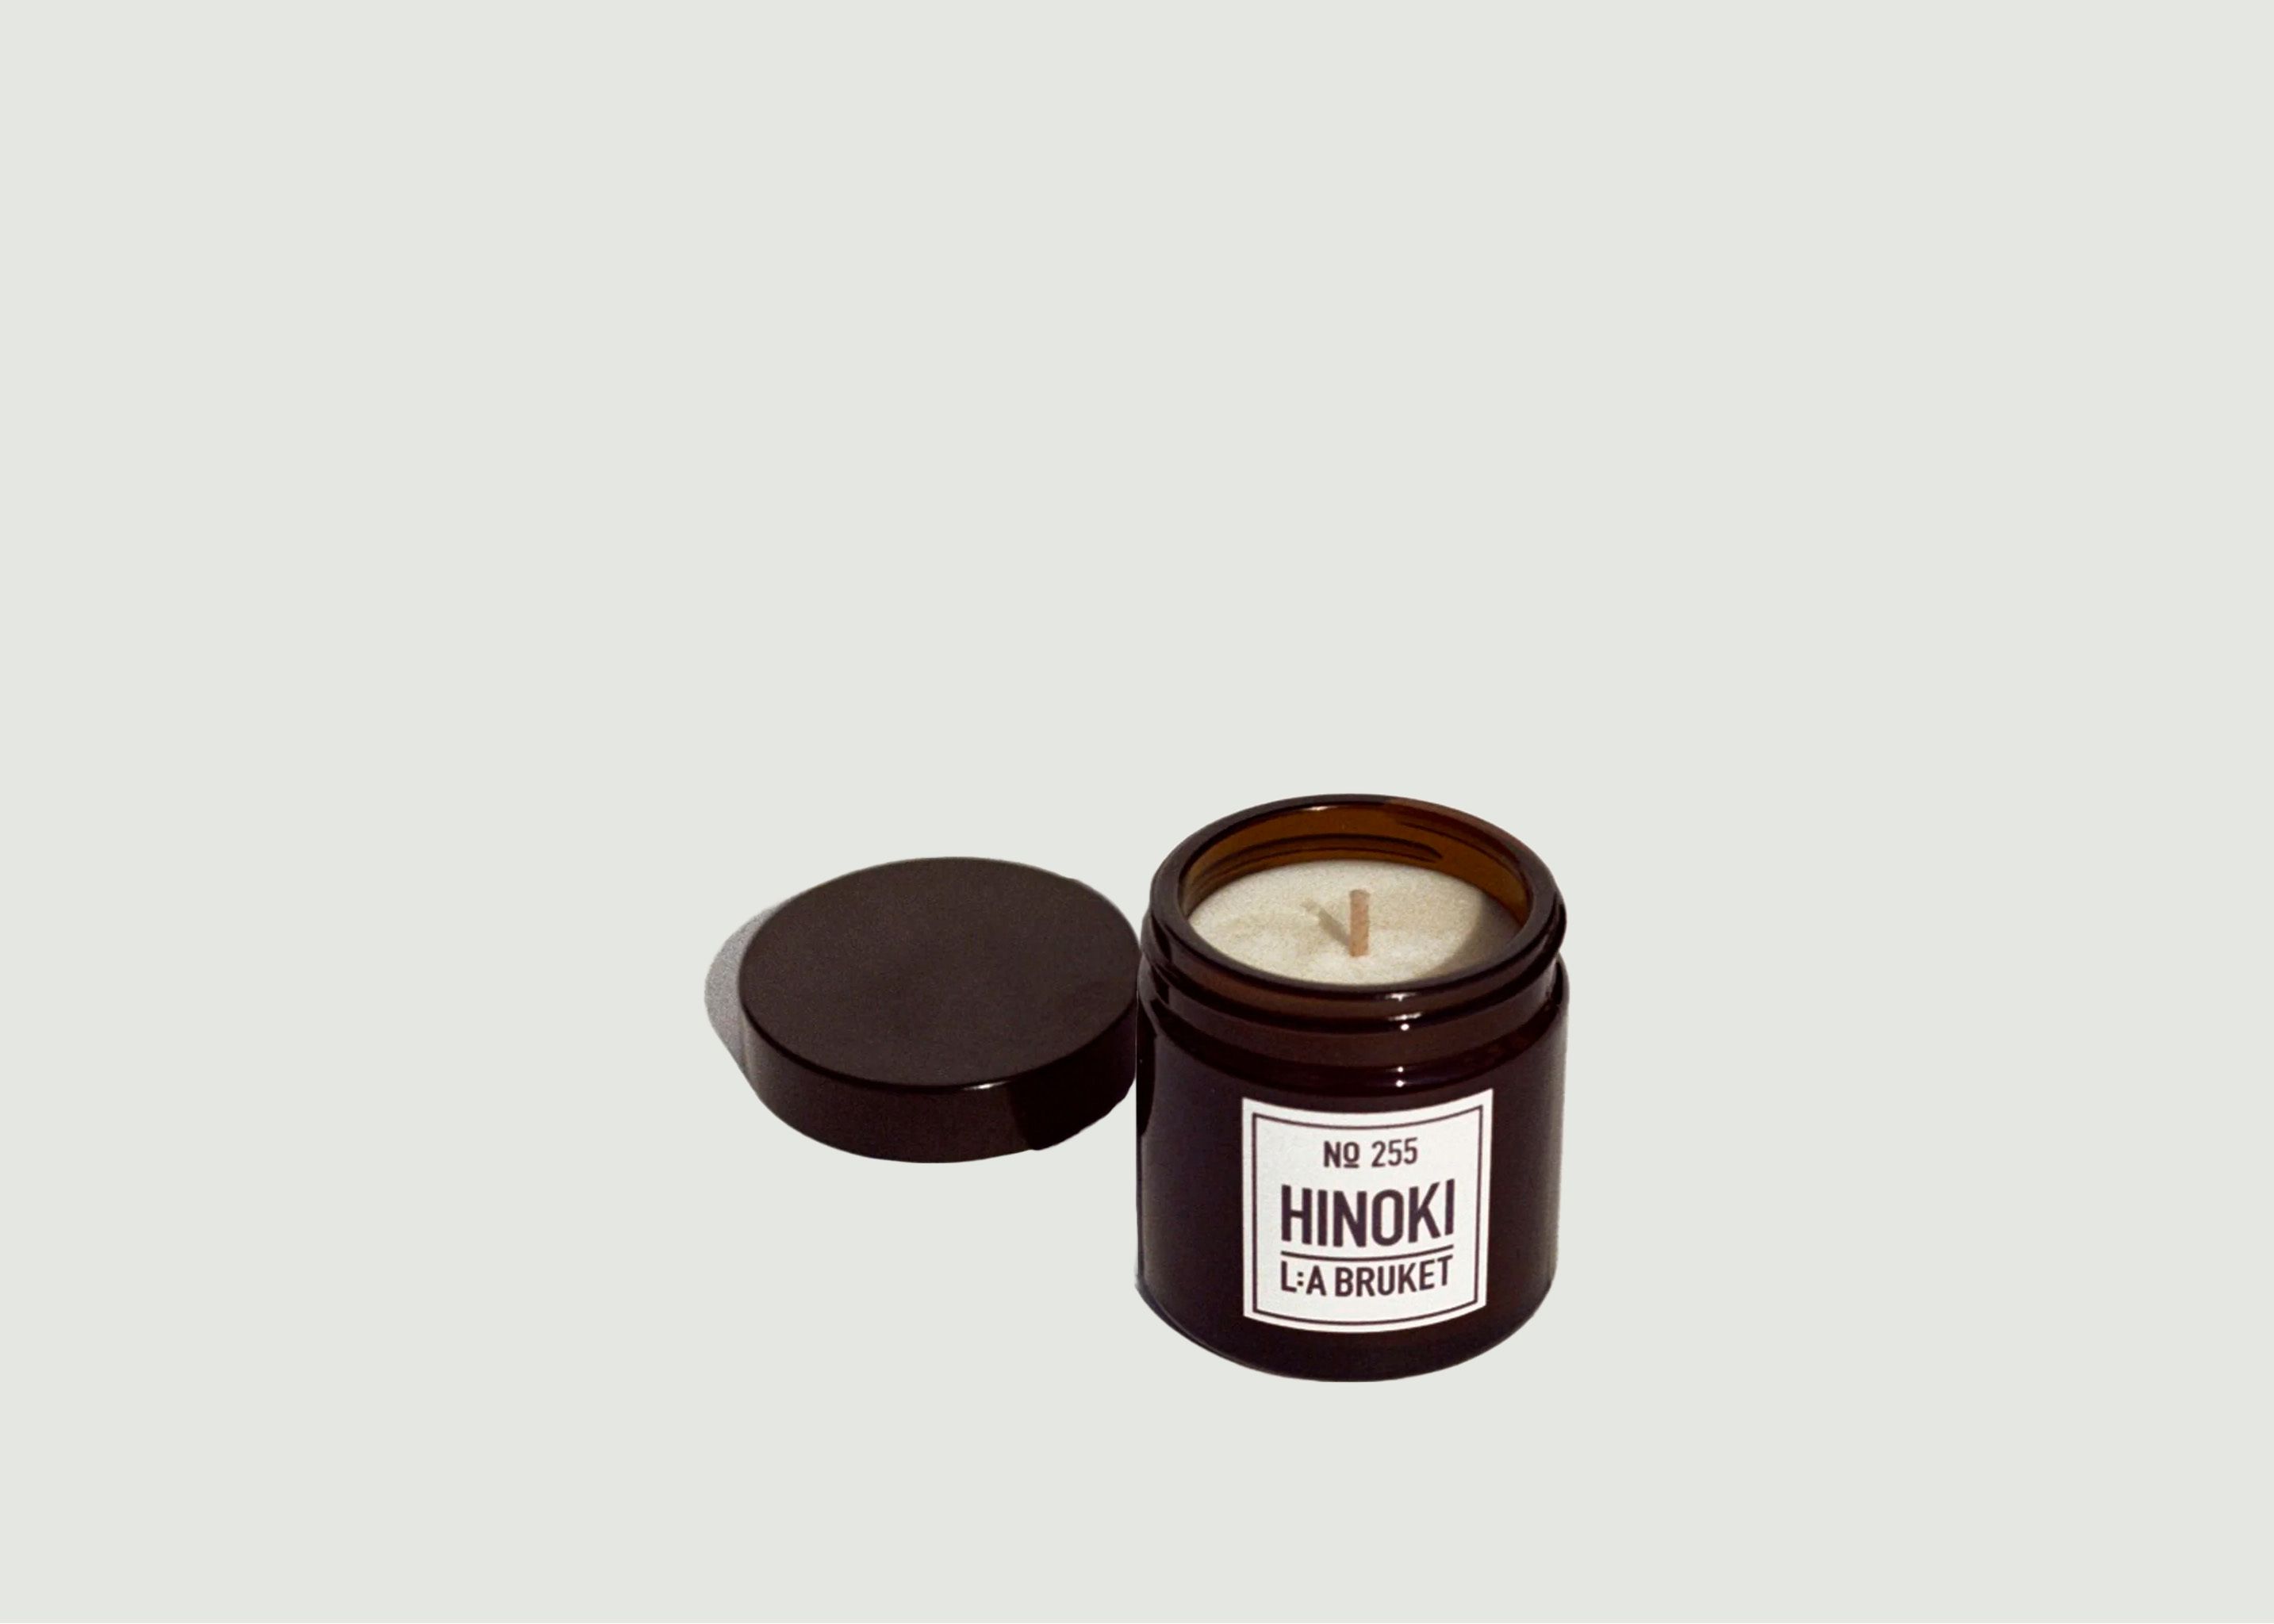 Scented candle - L:A Bruket